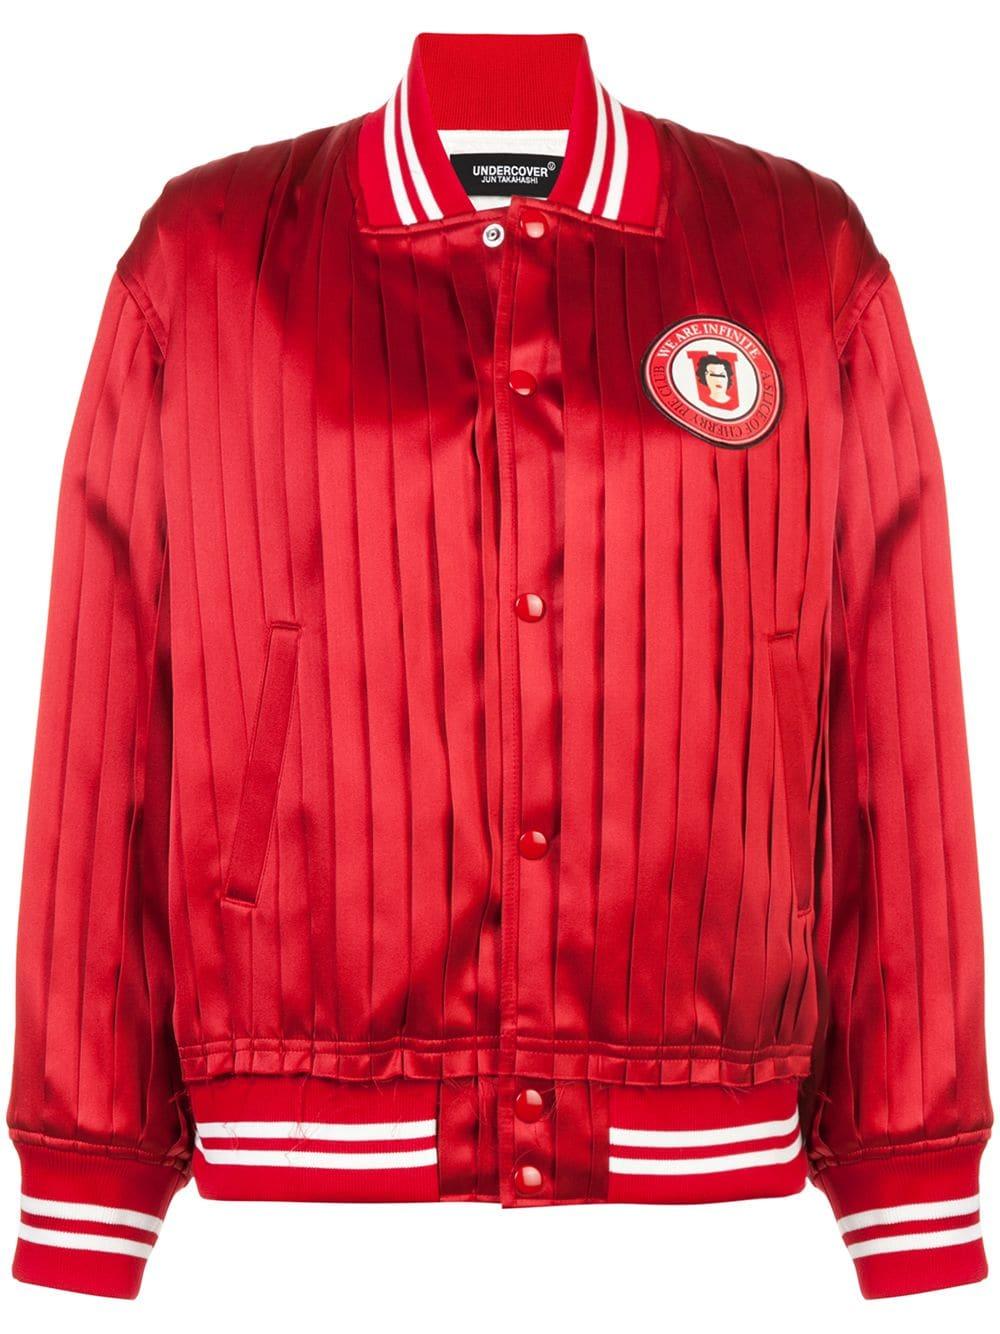 Undercover Silk Pleated Bomber Jacket in Red - Lyst